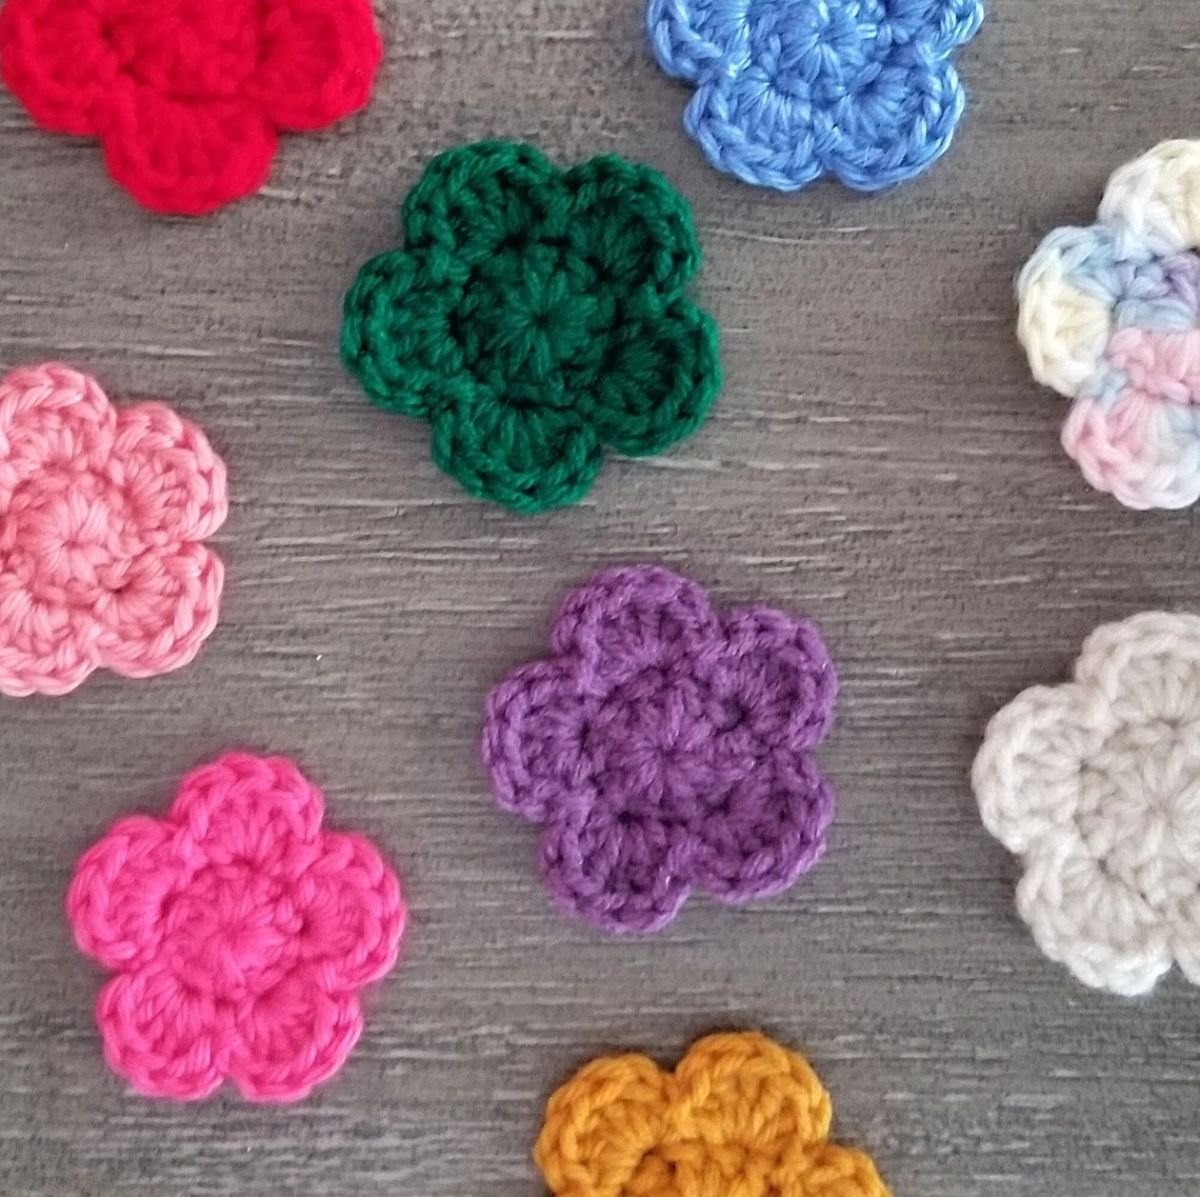 Small green, white, purple, pink, blue, yellow, and red crochet flowers lying on a wooden background.